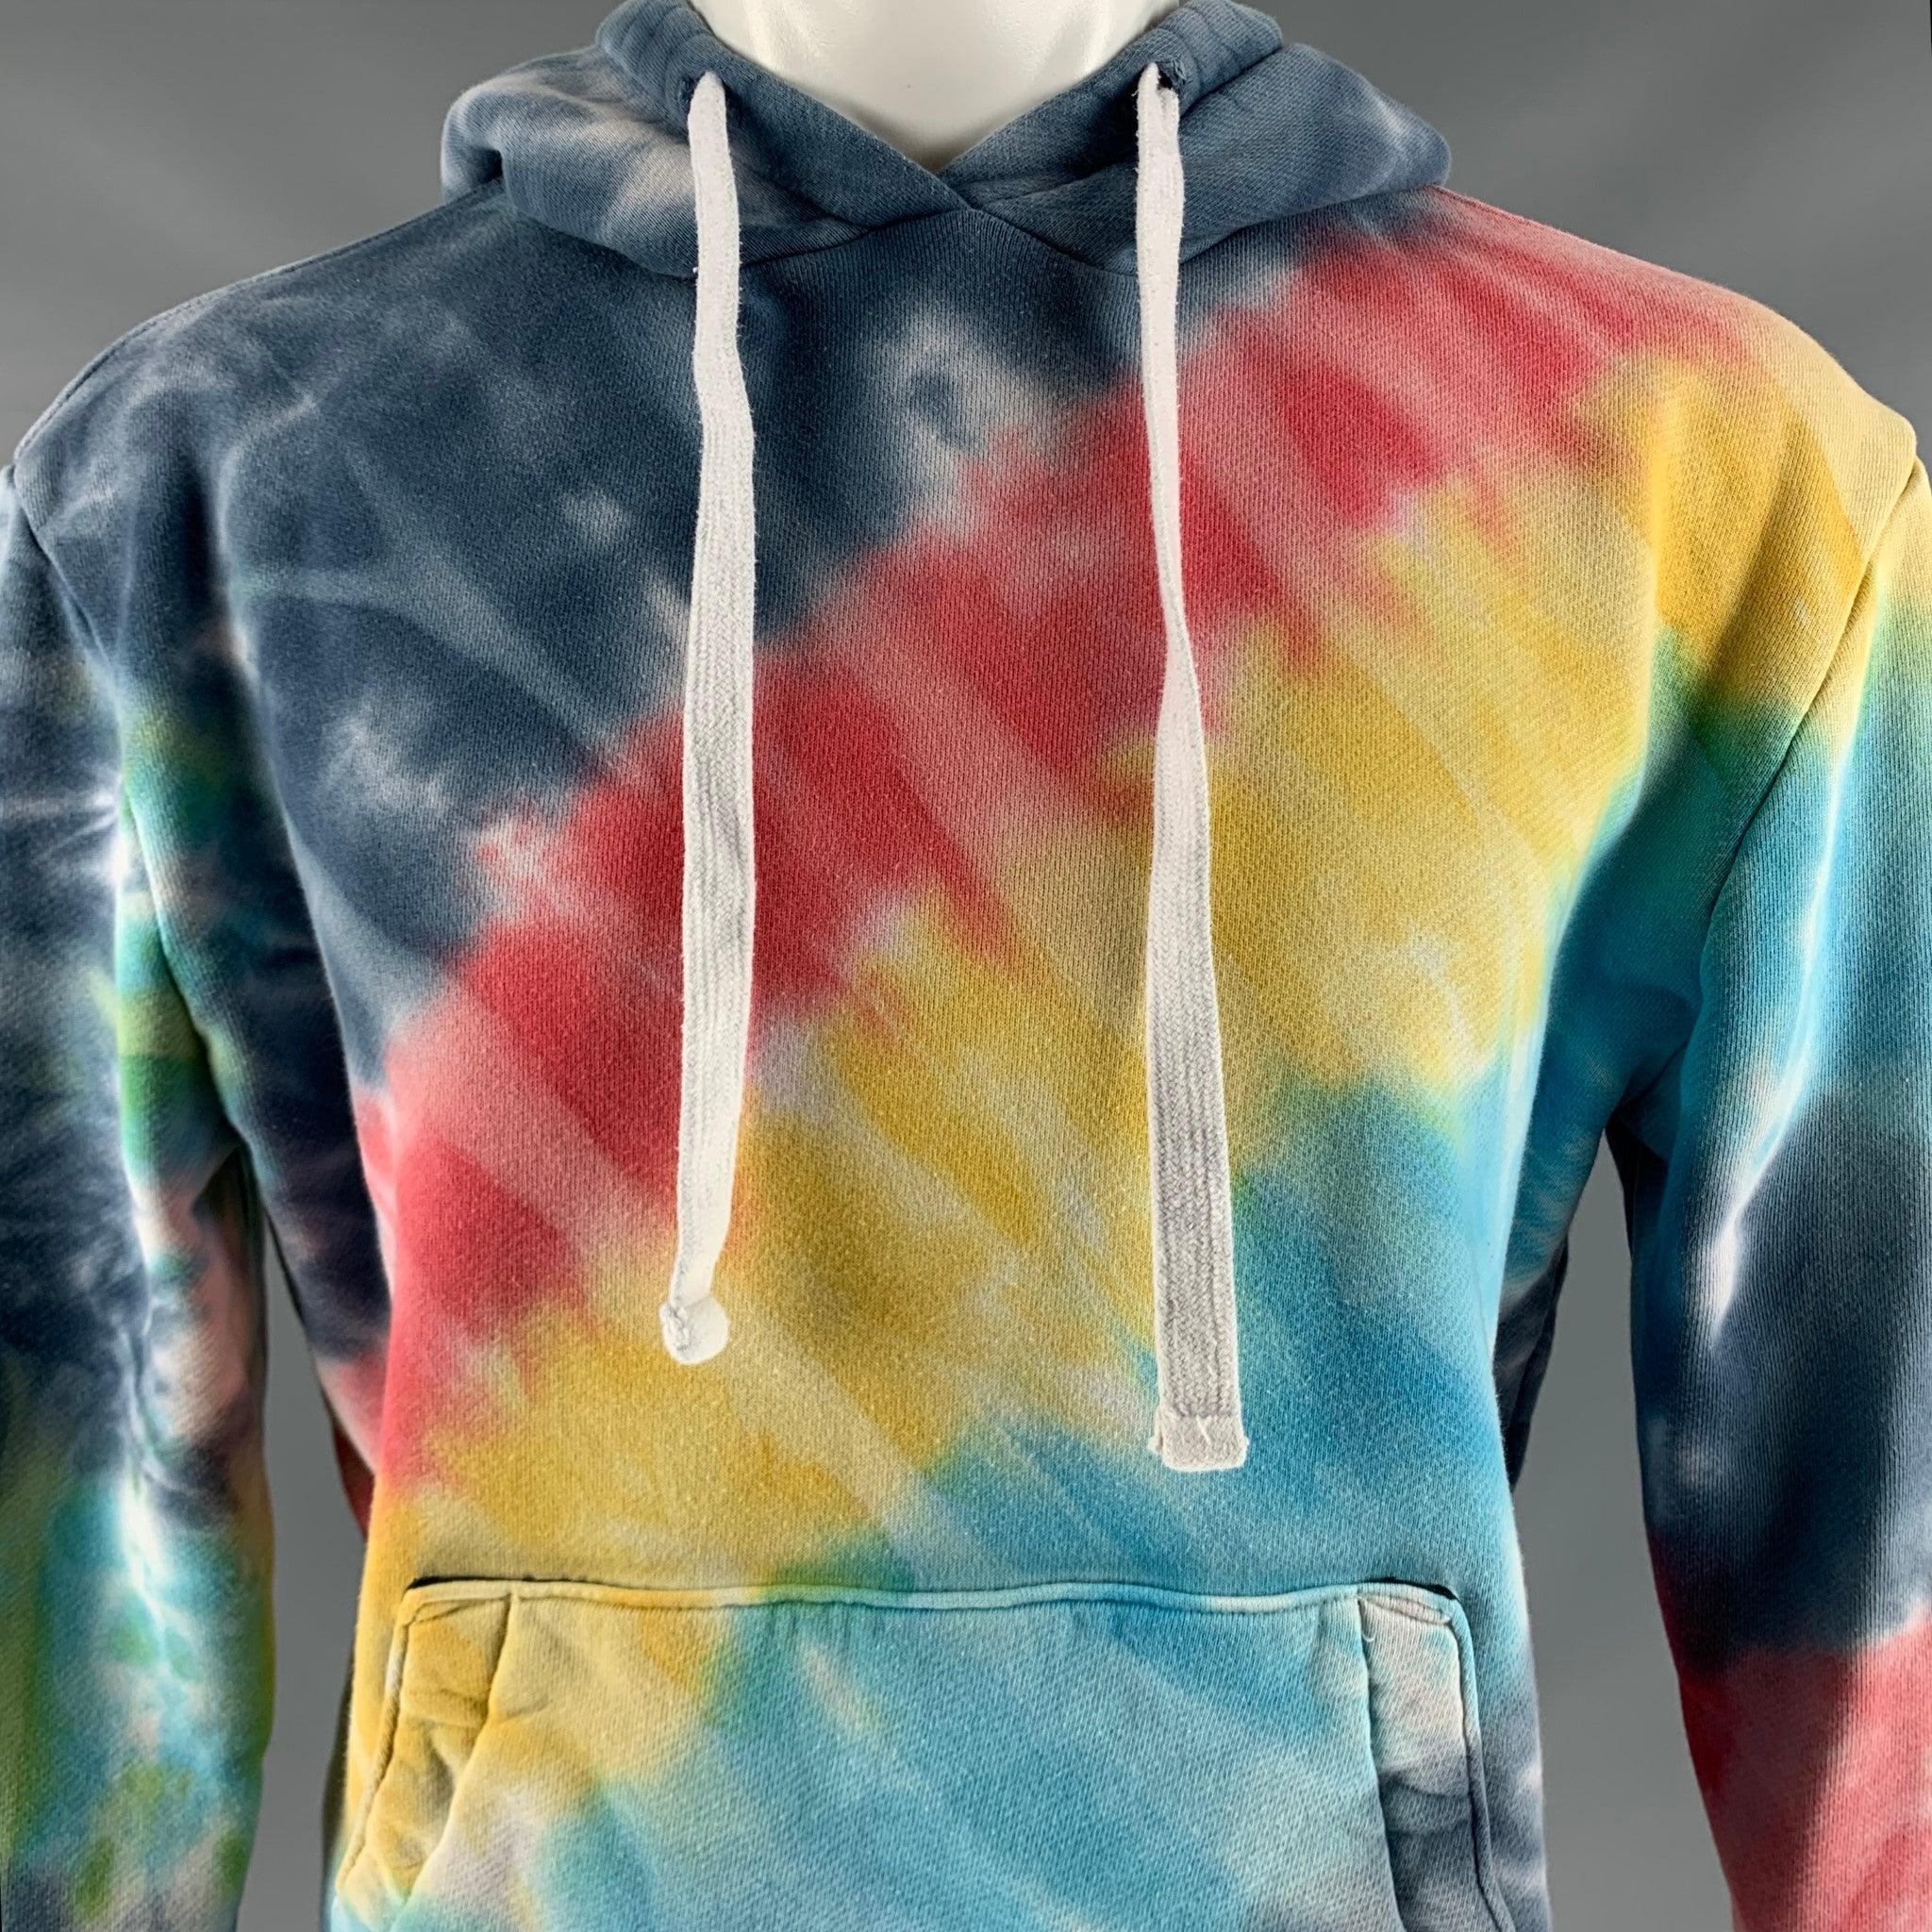 AMIRI sweatshirt
in a multi-color cotton fabric featuring a hoodie style, vibrant tie dye, white star arm details, and kangaroo pockets. Made in USA.Very Good Pre-Owned Condition. Minor pilling. 

Marked:   S 

Measurements: 
 
Shoulder: 21 inches